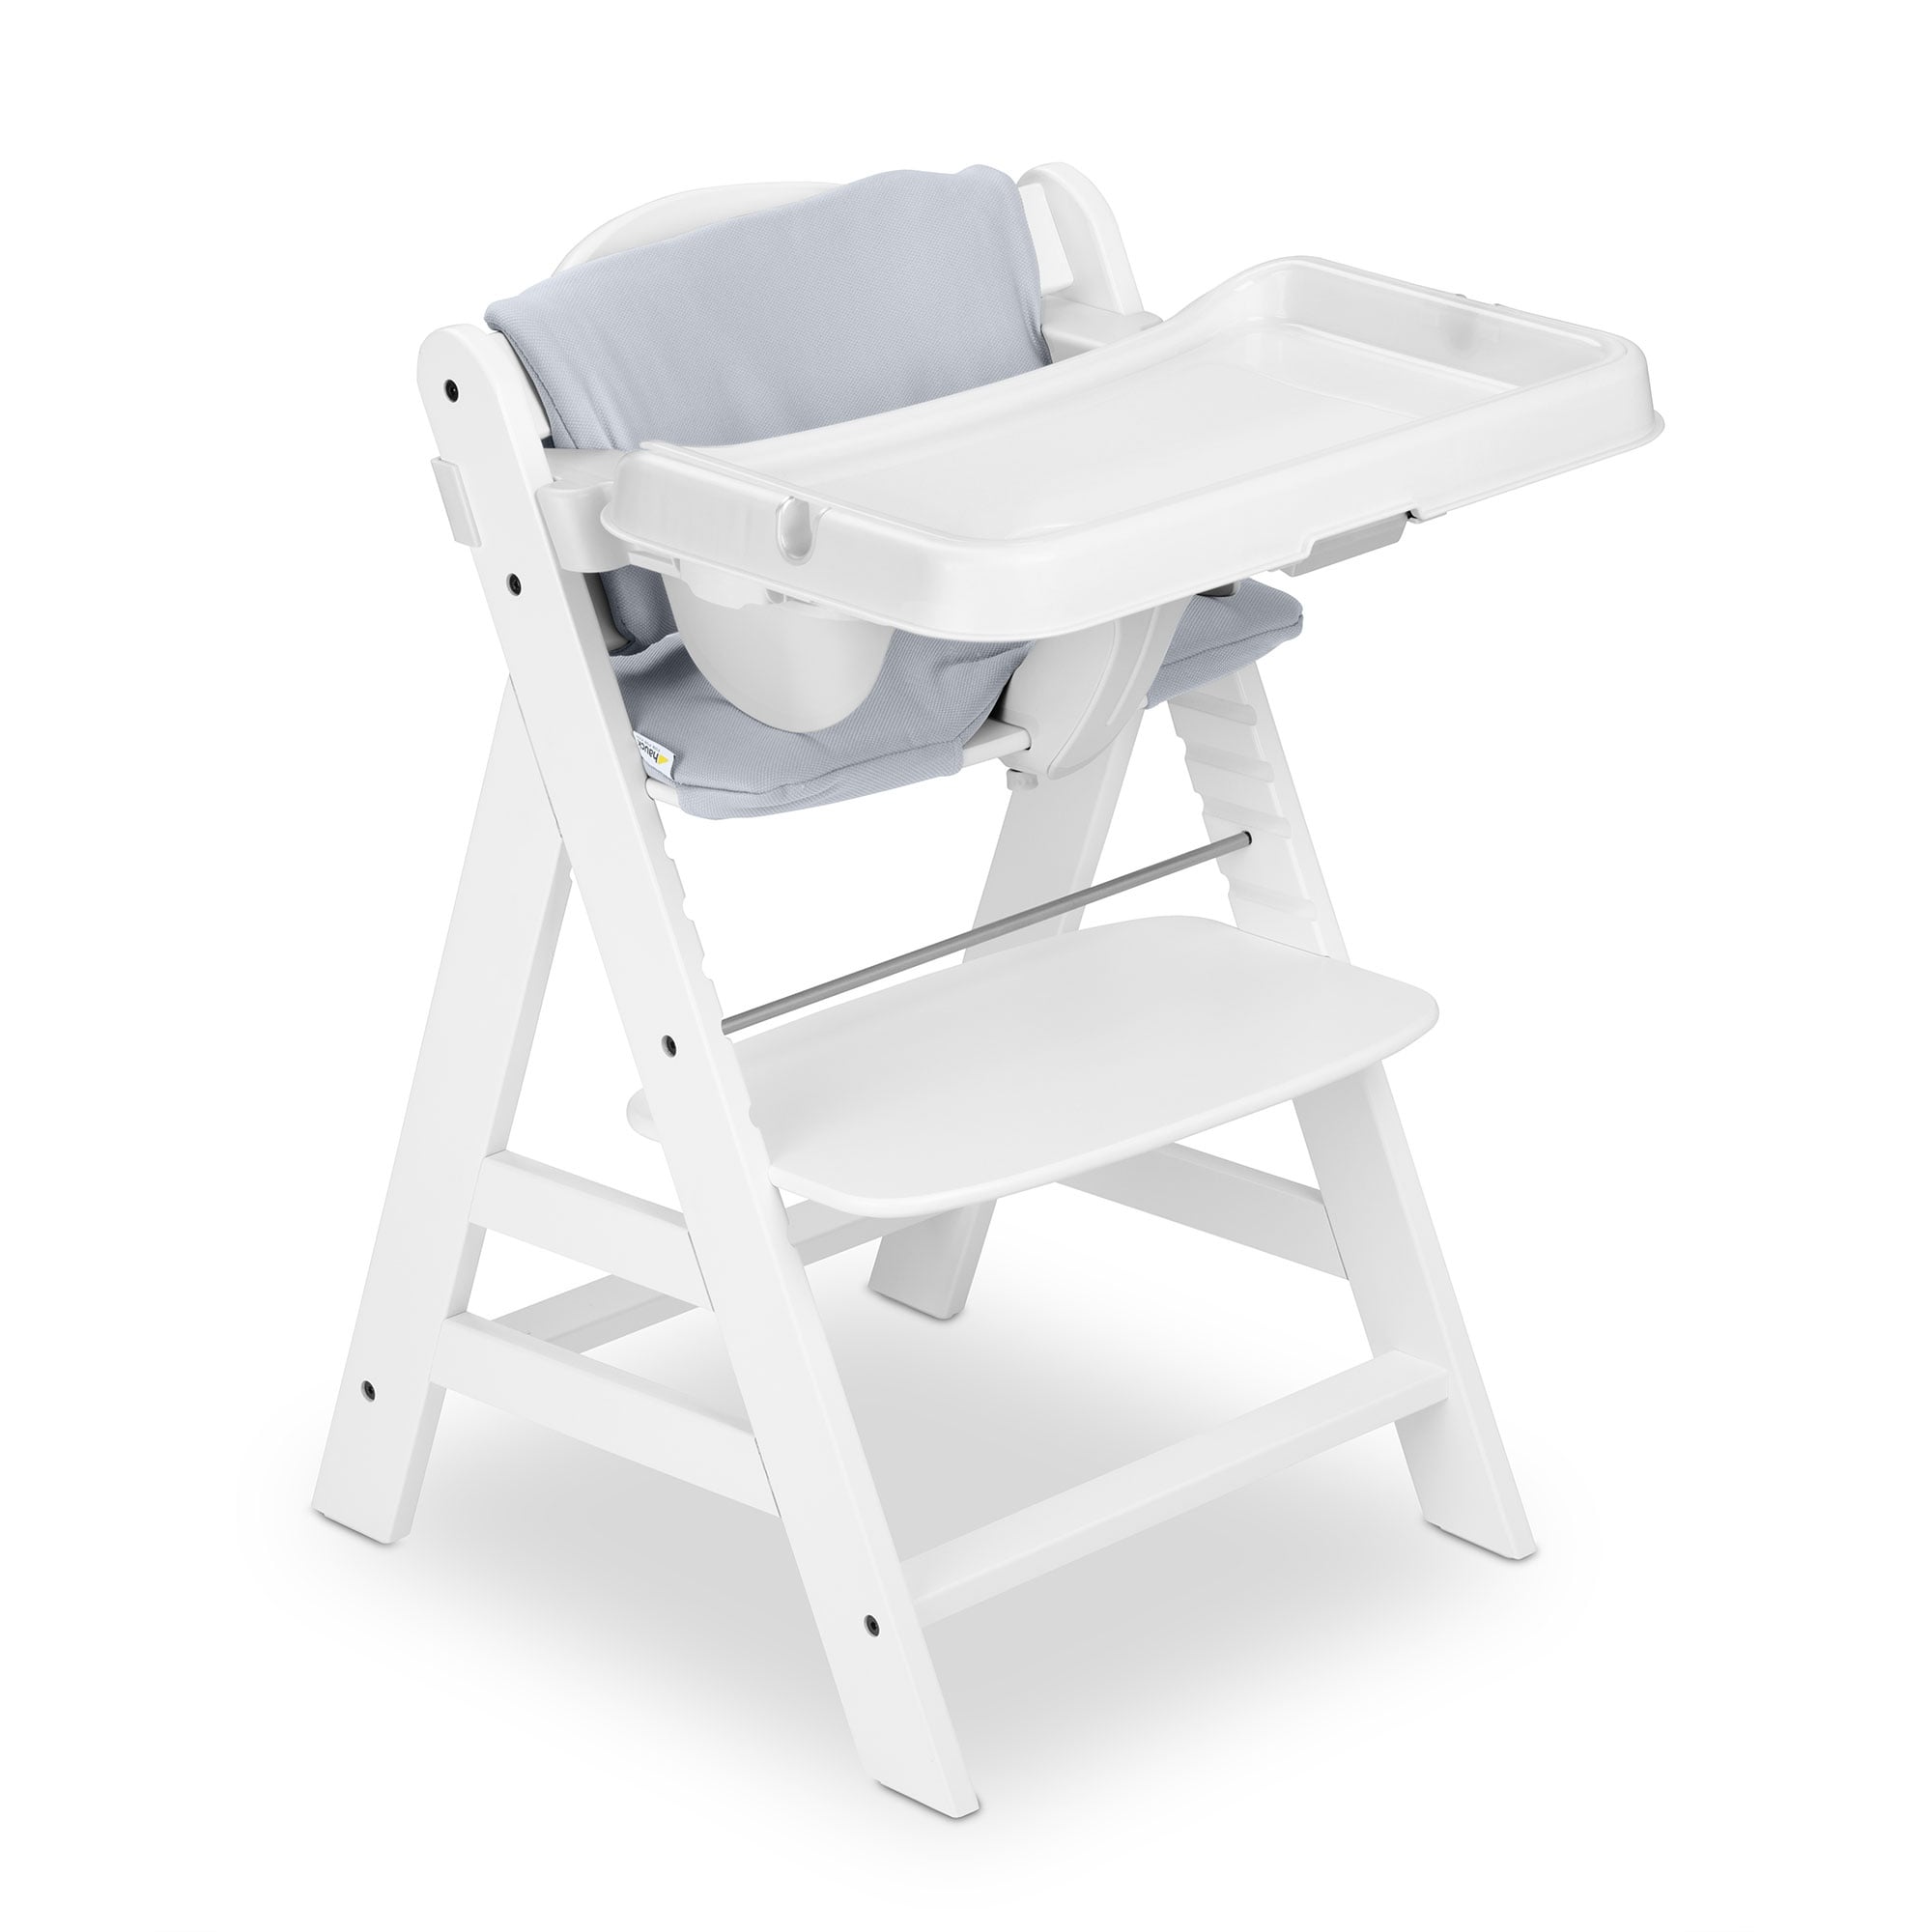 Hauck Alpha Tray, 3-in-1 Table Set for Hauck Wooden Highchairs Alpha+,  Beta+